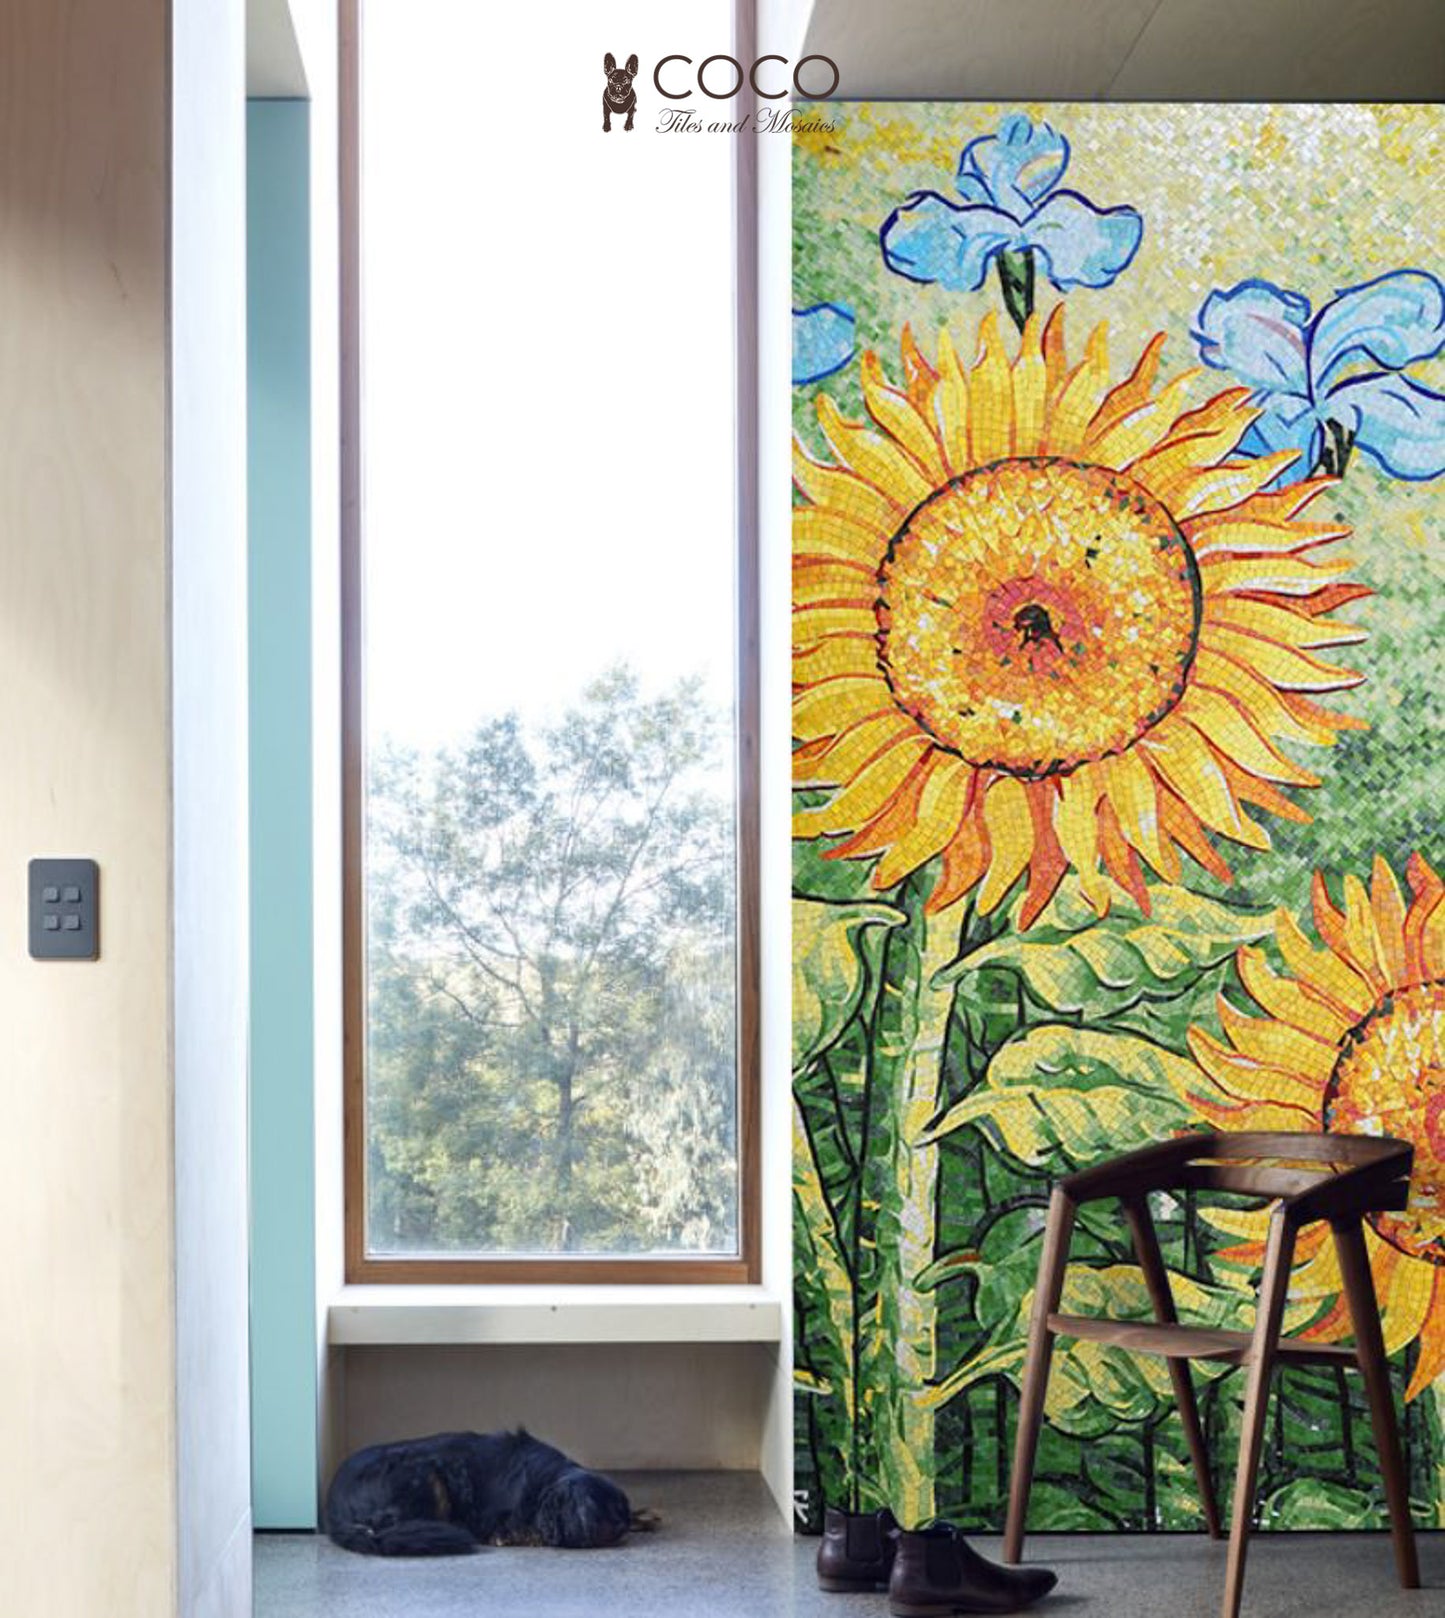 Artistic Mosaic - Sunflowers and Blue Poppies